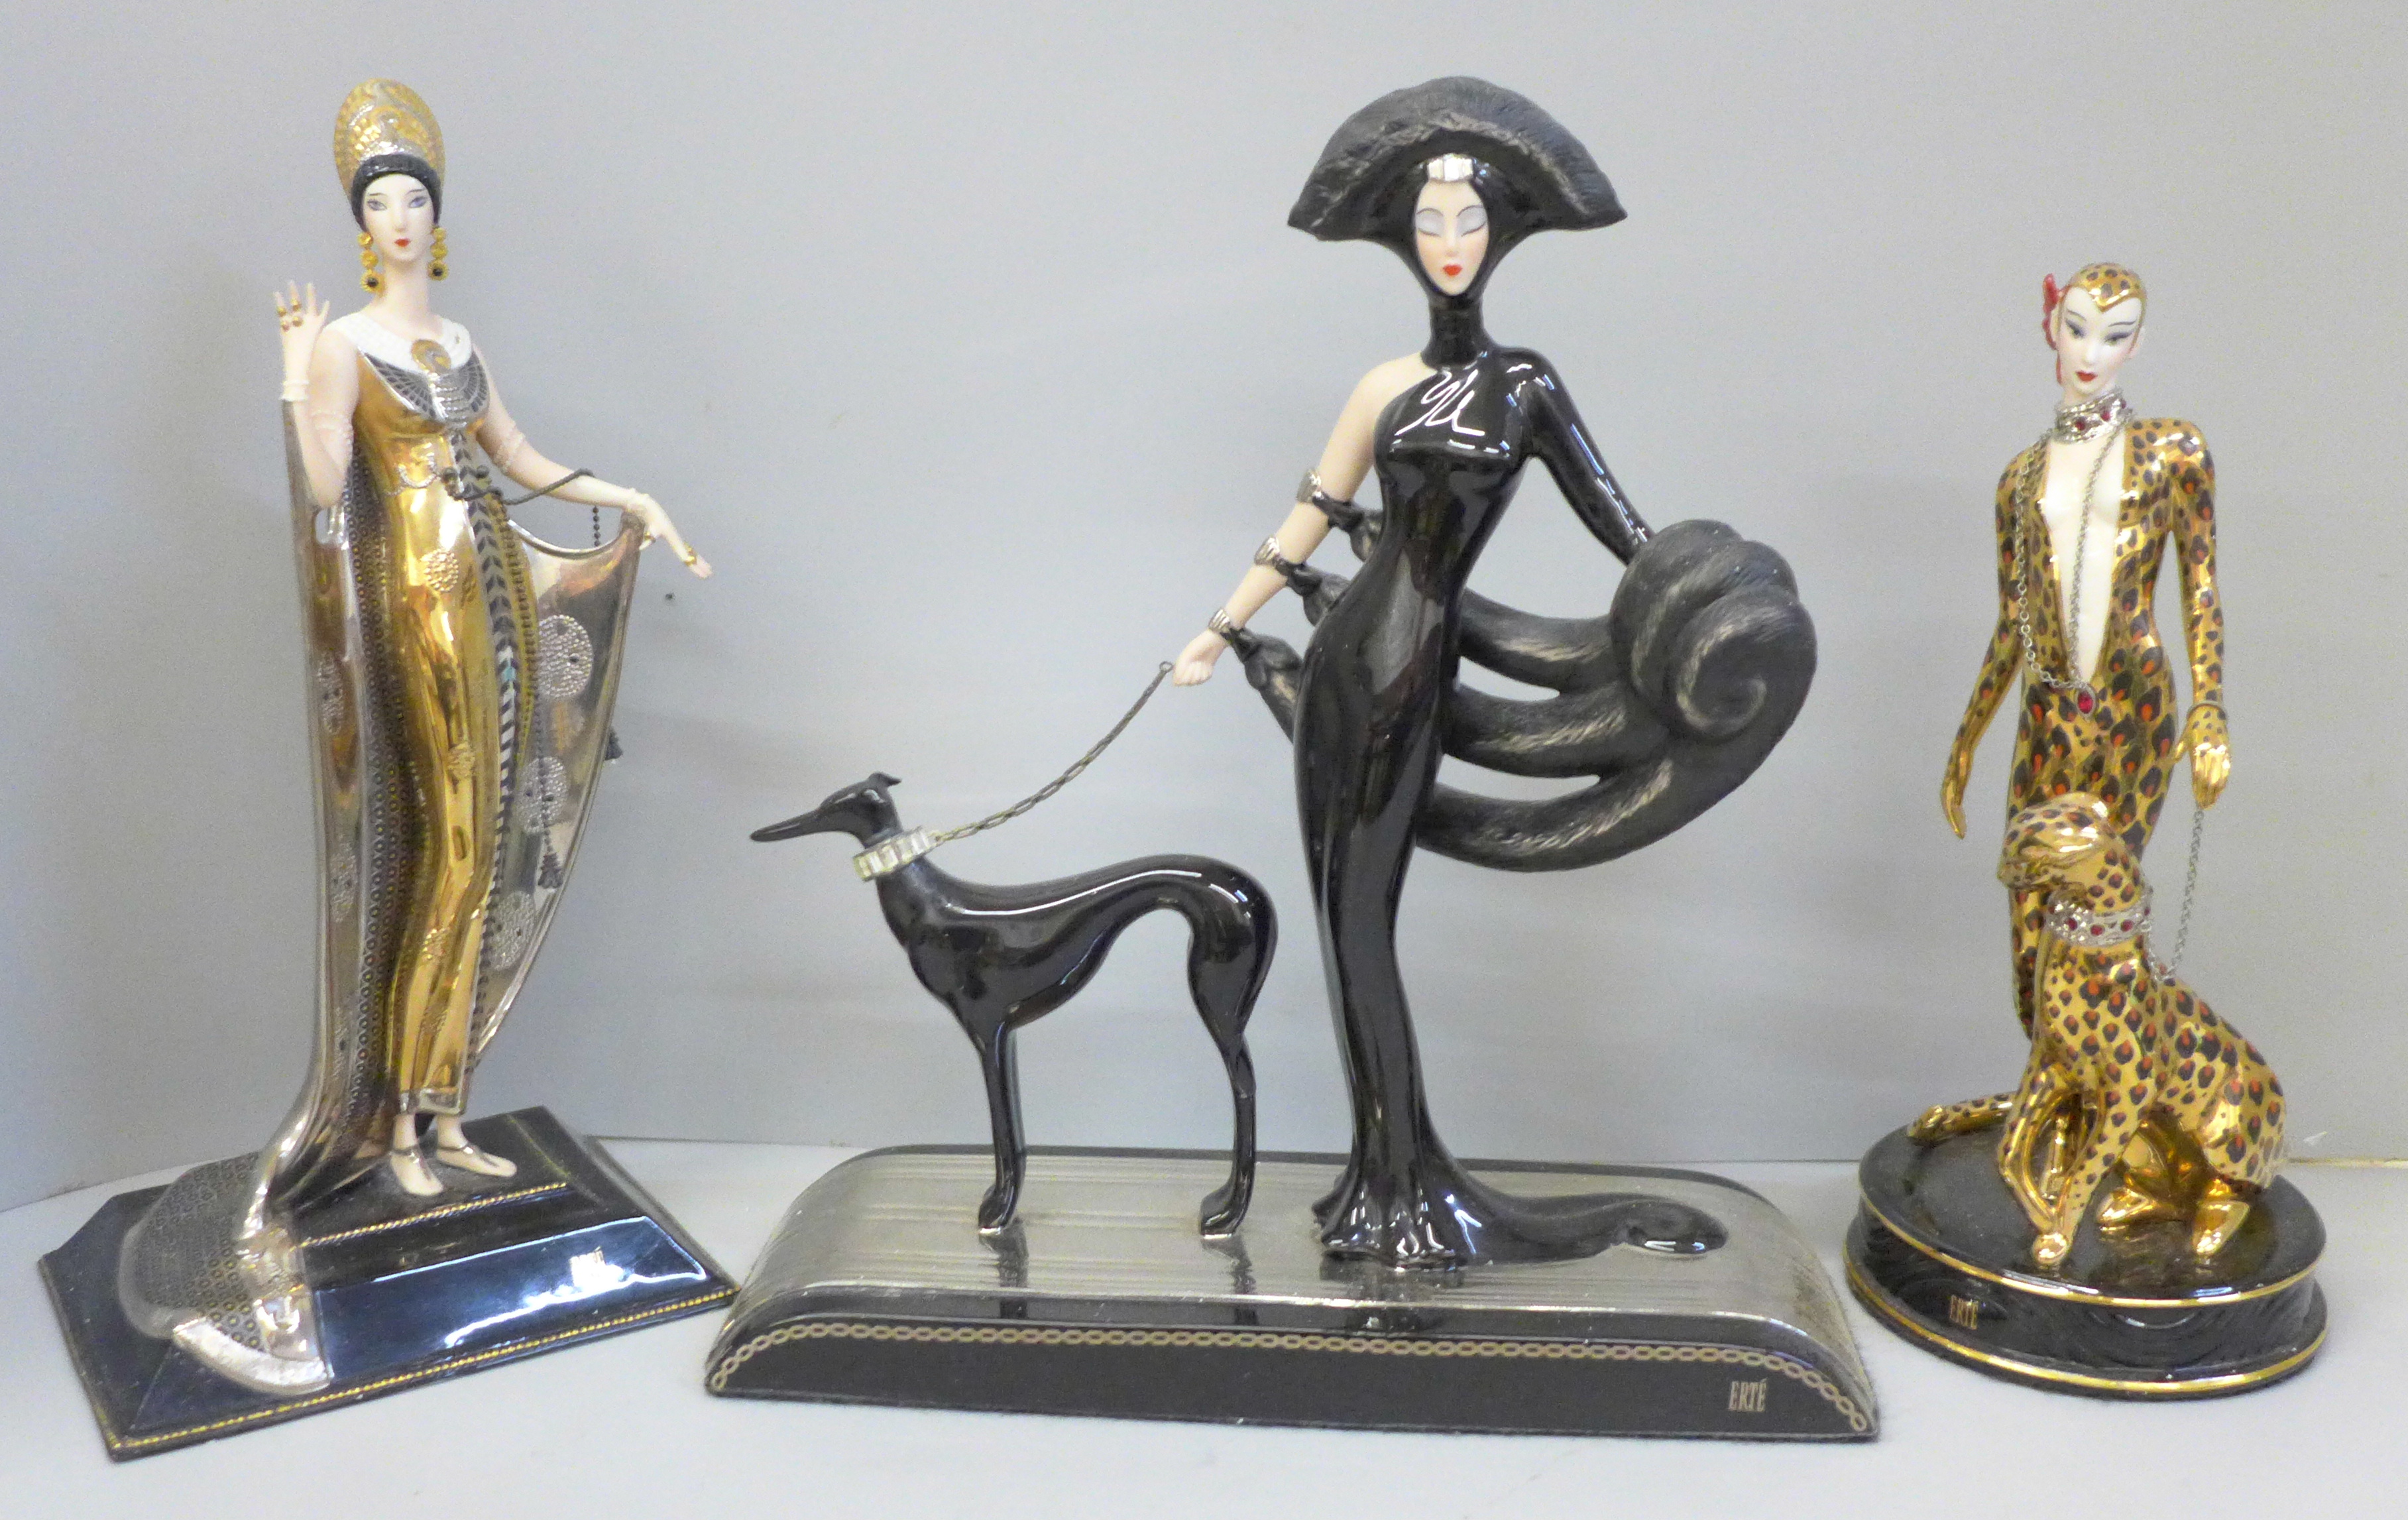 Three House of Erte figures, all limited edition, Isis, Symphone in Black and Leopard